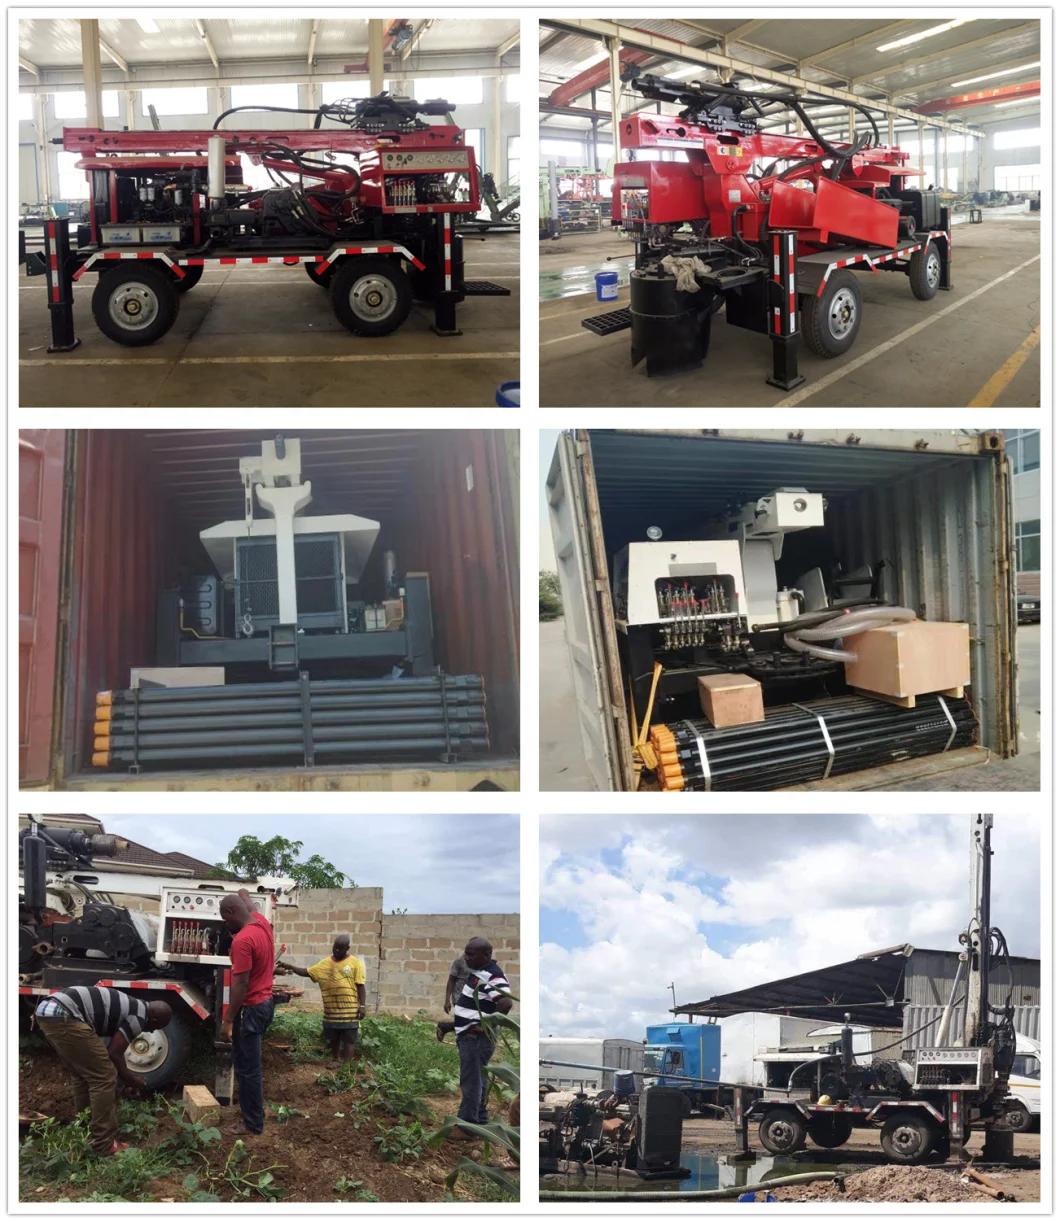 100 200 300 Meters Trailer Hard Rock Borehole Well DTH Crawler Underground Water Drill Rig Sly510